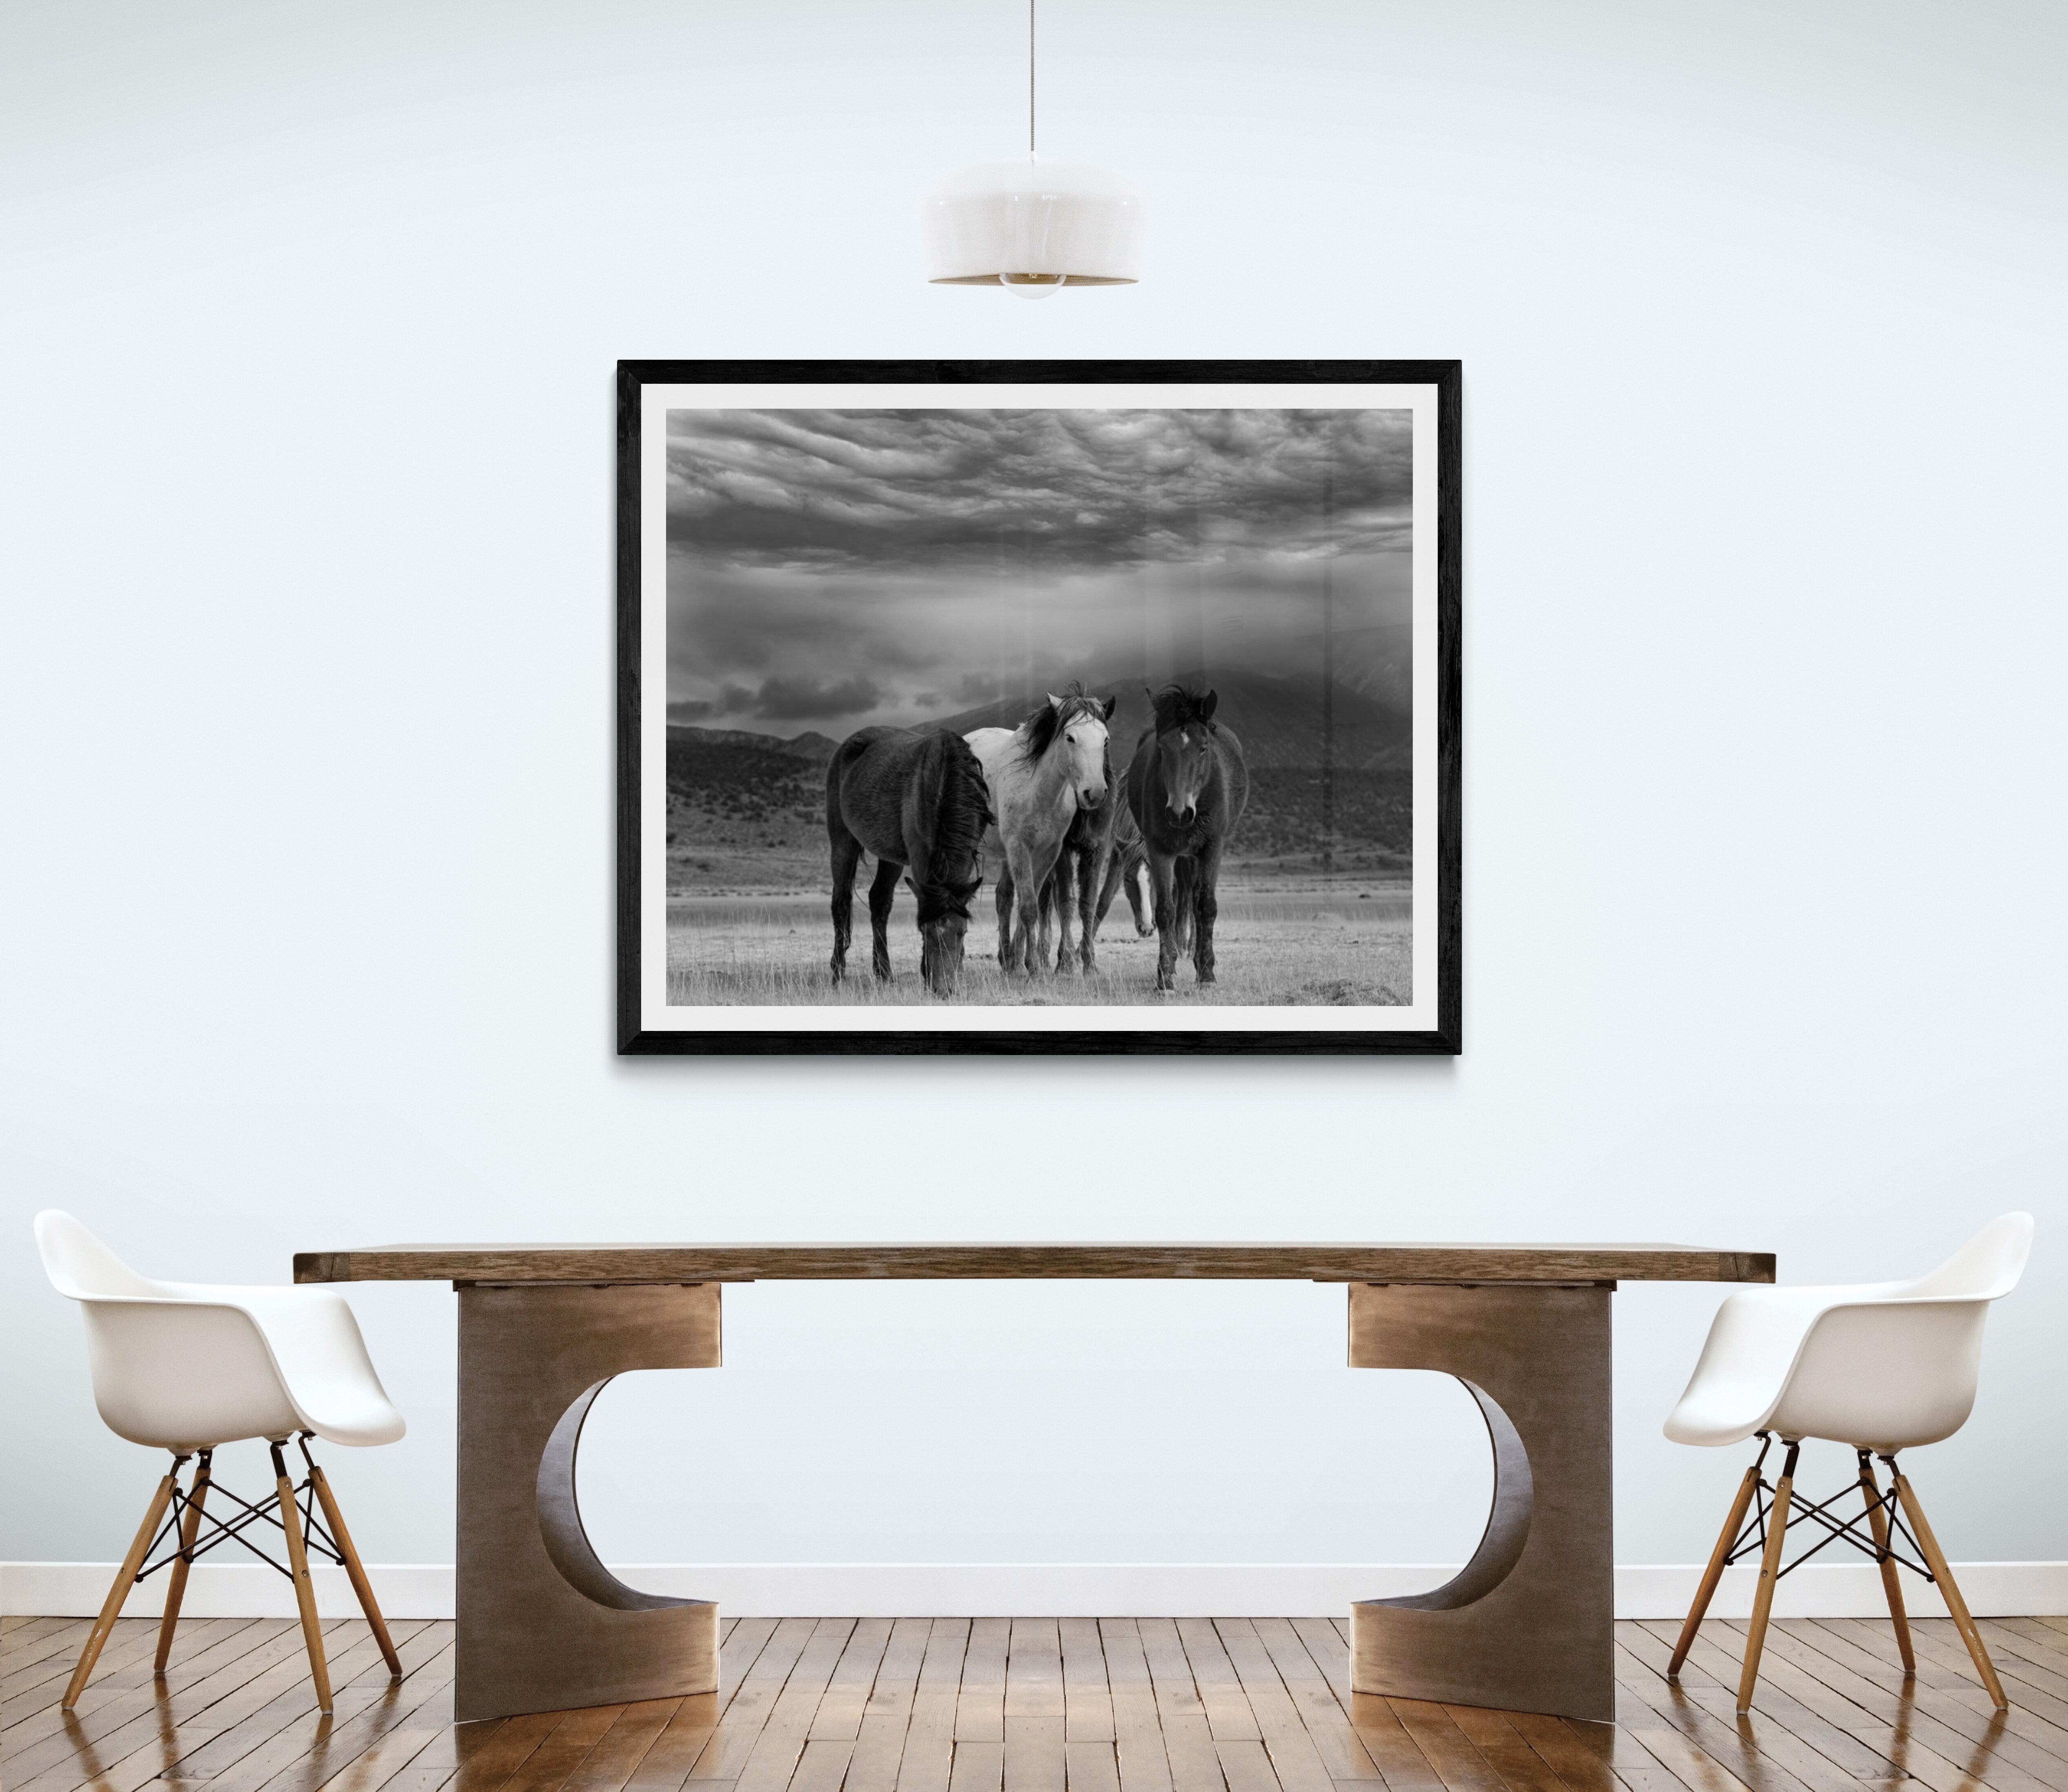 Black and White Photography Wild Horses, Mustangs, Dust & Horses 40x50 Unsigned - Print by Shane Russeck